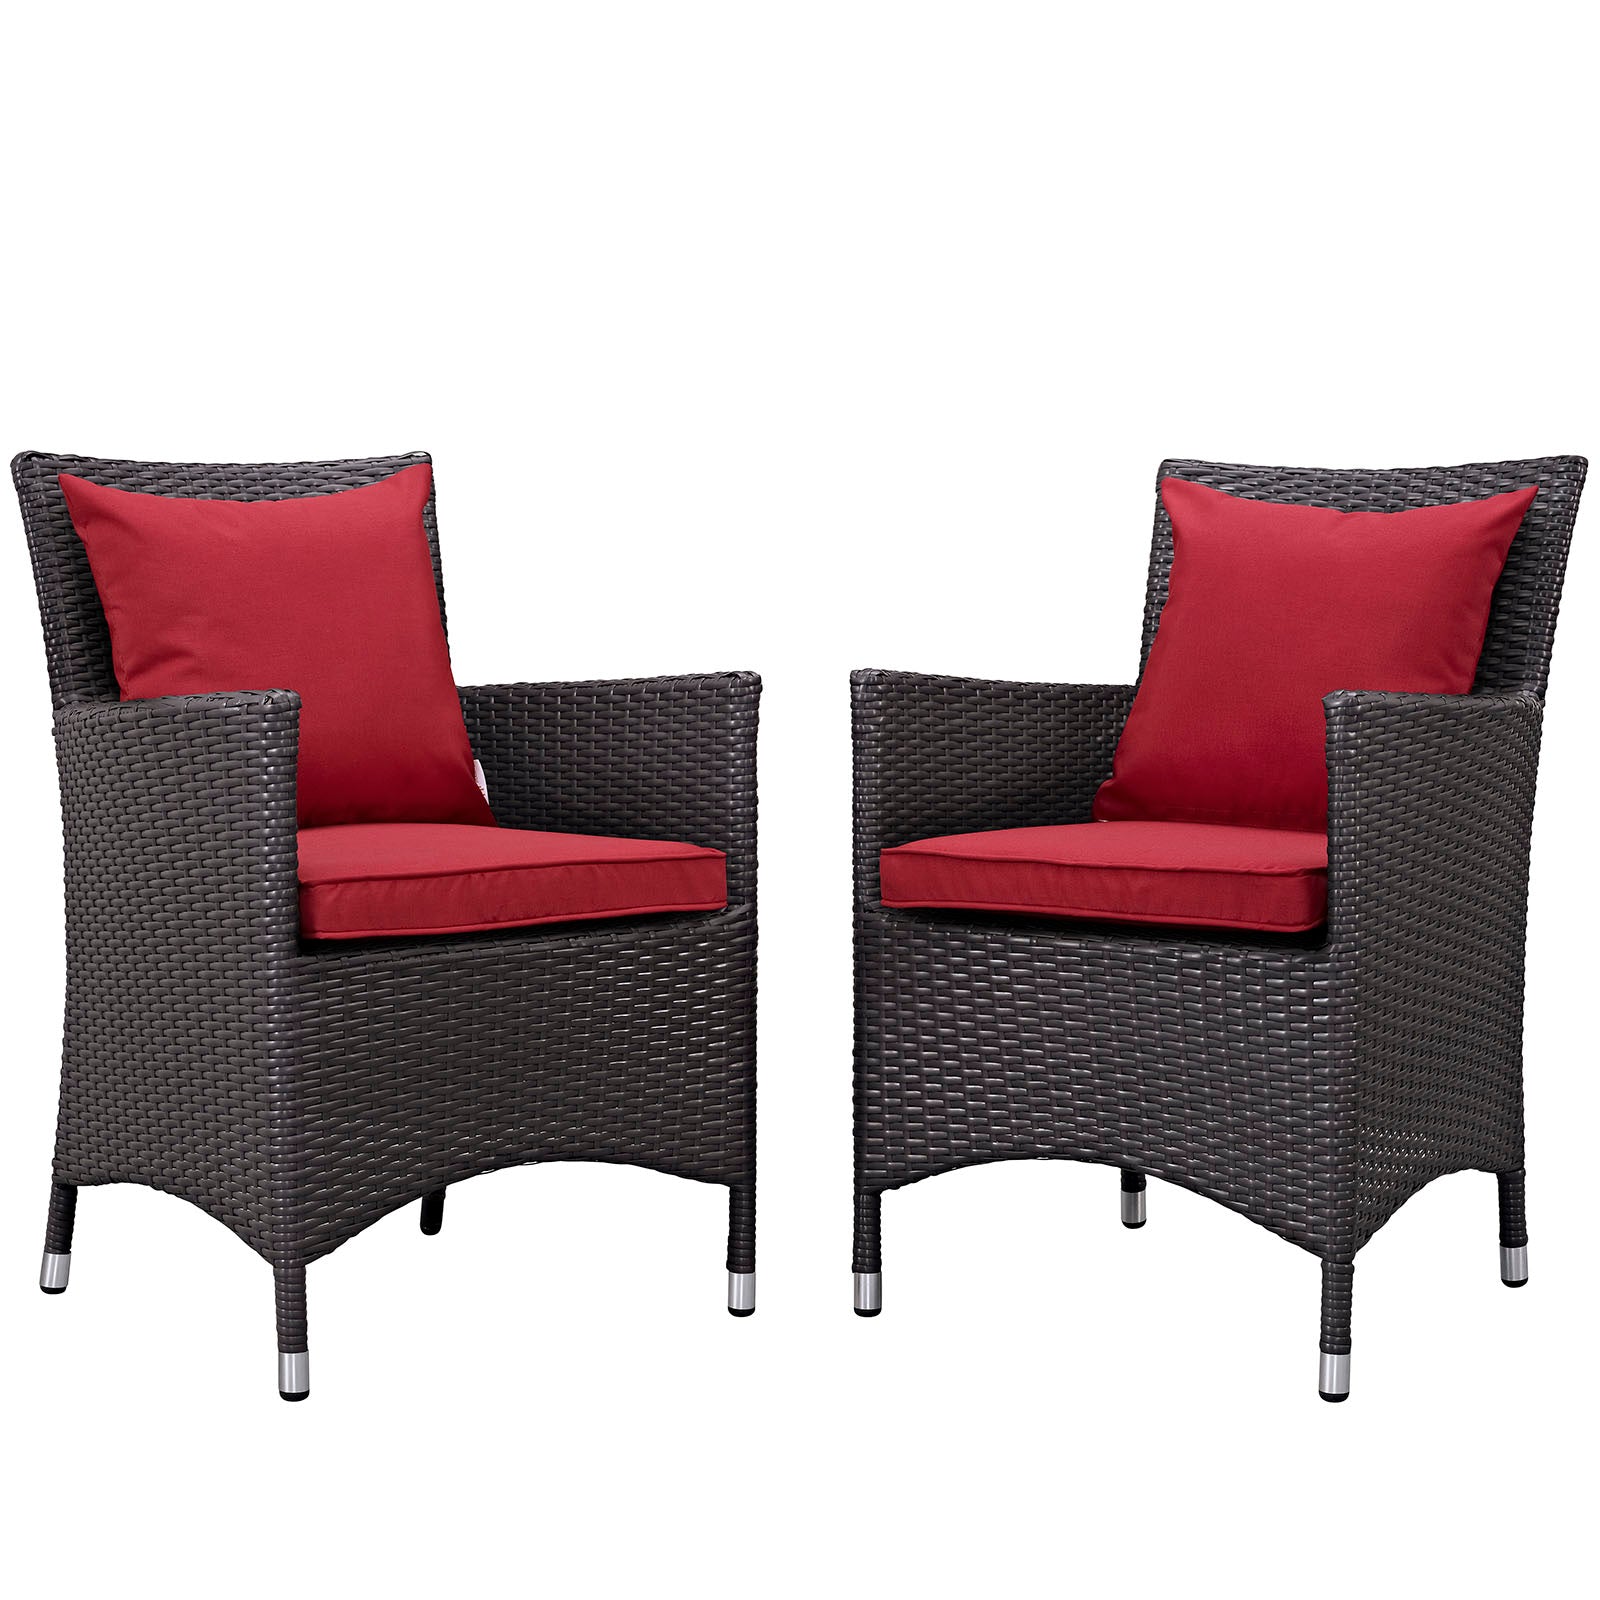 Convene 2 Piece Outdoor Patio Dining Set-Outdoor Dining Set-Modway-Wall2Wall Furnishings